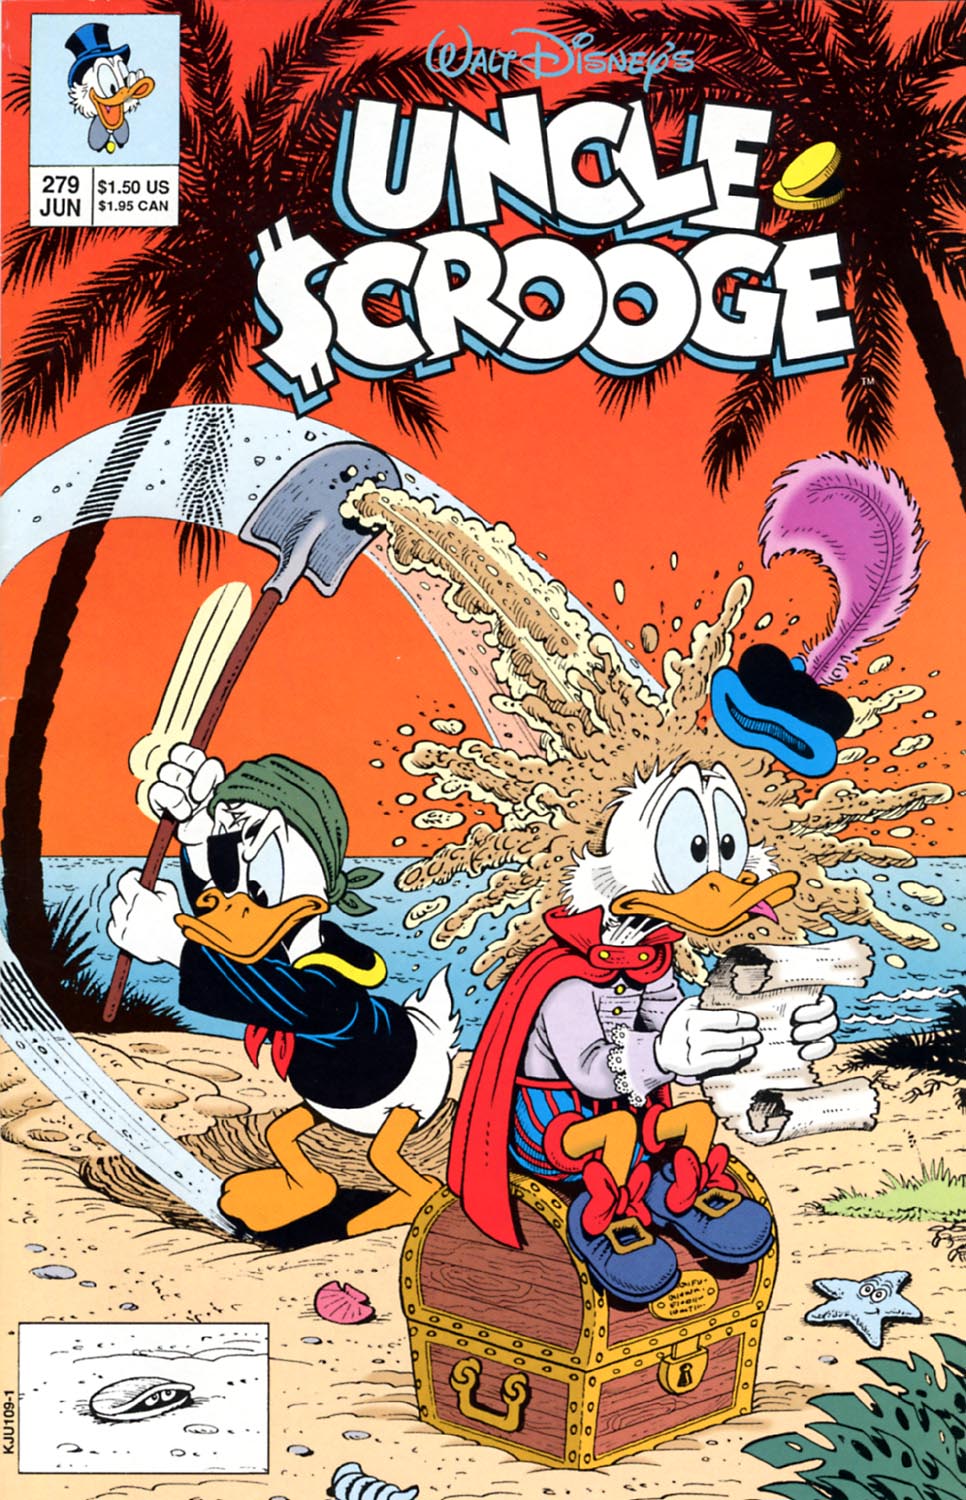 Read online Uncle Scrooge (1953) comic -  Issue #279 - 1